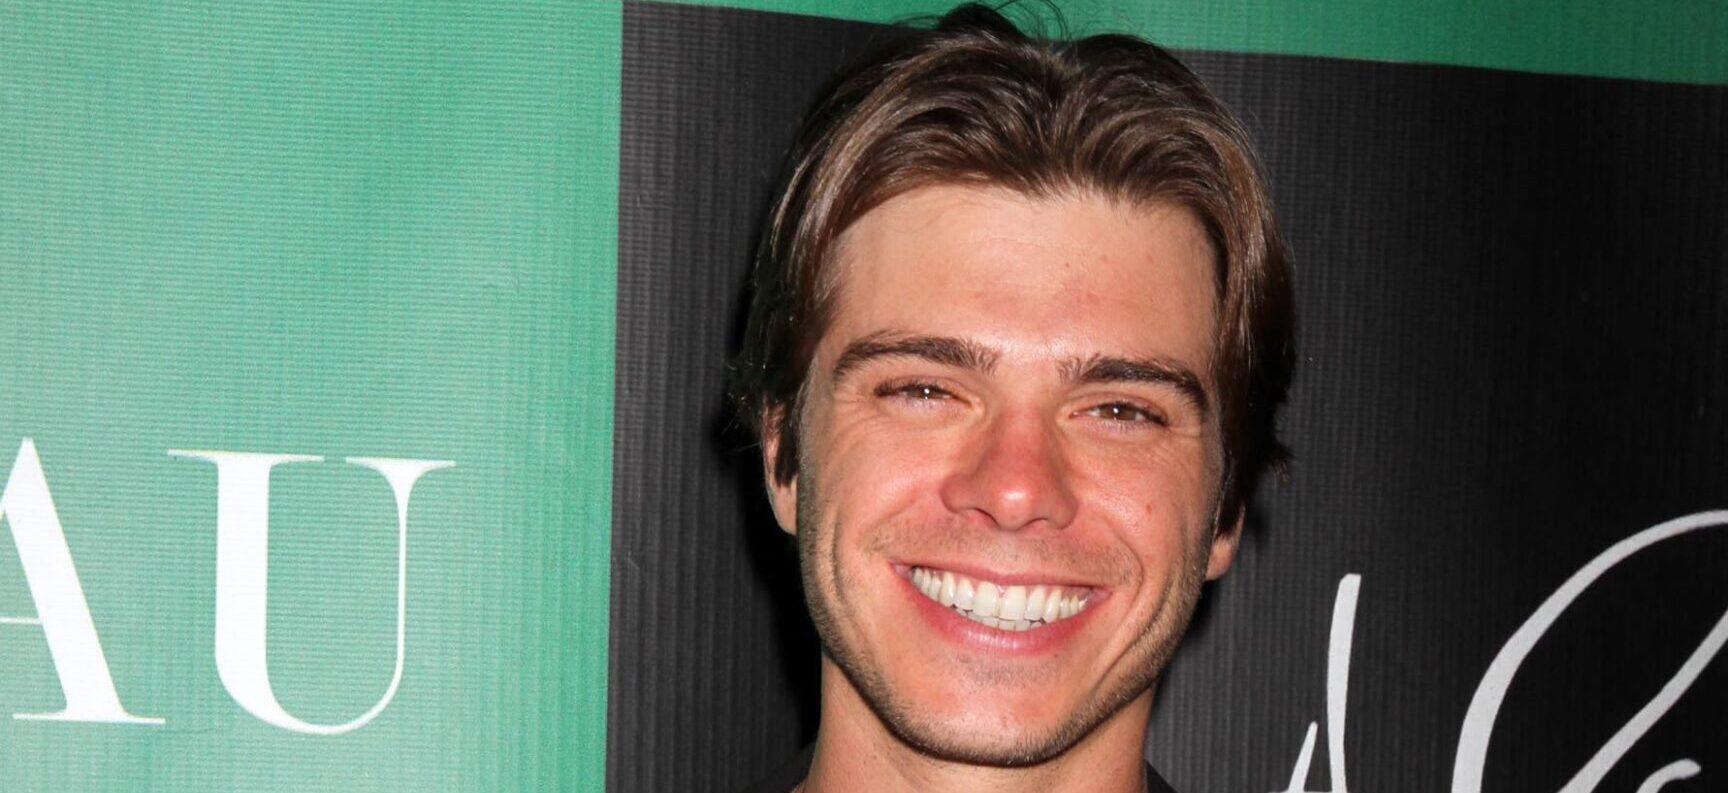 Matthew Lawrence Claims 'A Very Prominent' Director Asked Him To Strip In Exchange For A 'Marvel' Role